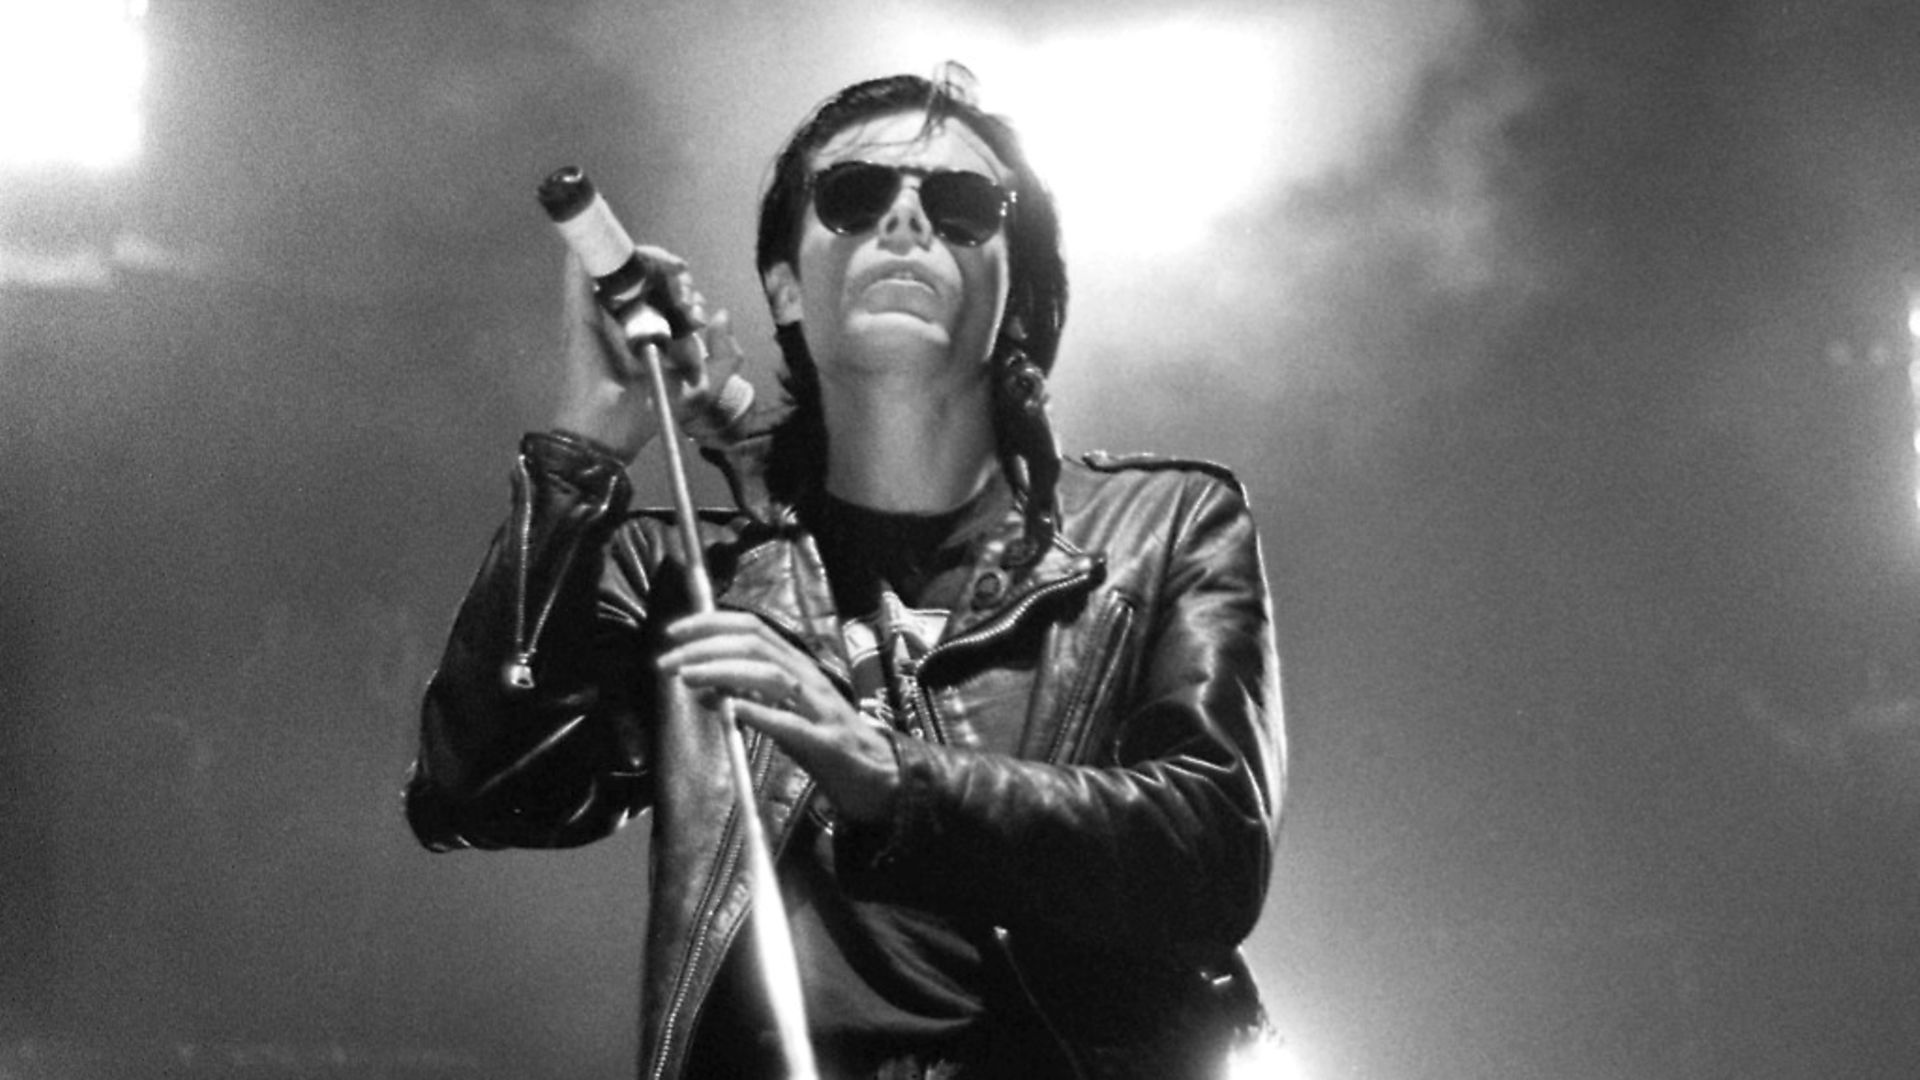 Sisters of Mercy frontman Andrew Eldritch performs on stage at Wembley Arena, London, in 1990. Picture: Getty Images - Credit: Getty Images